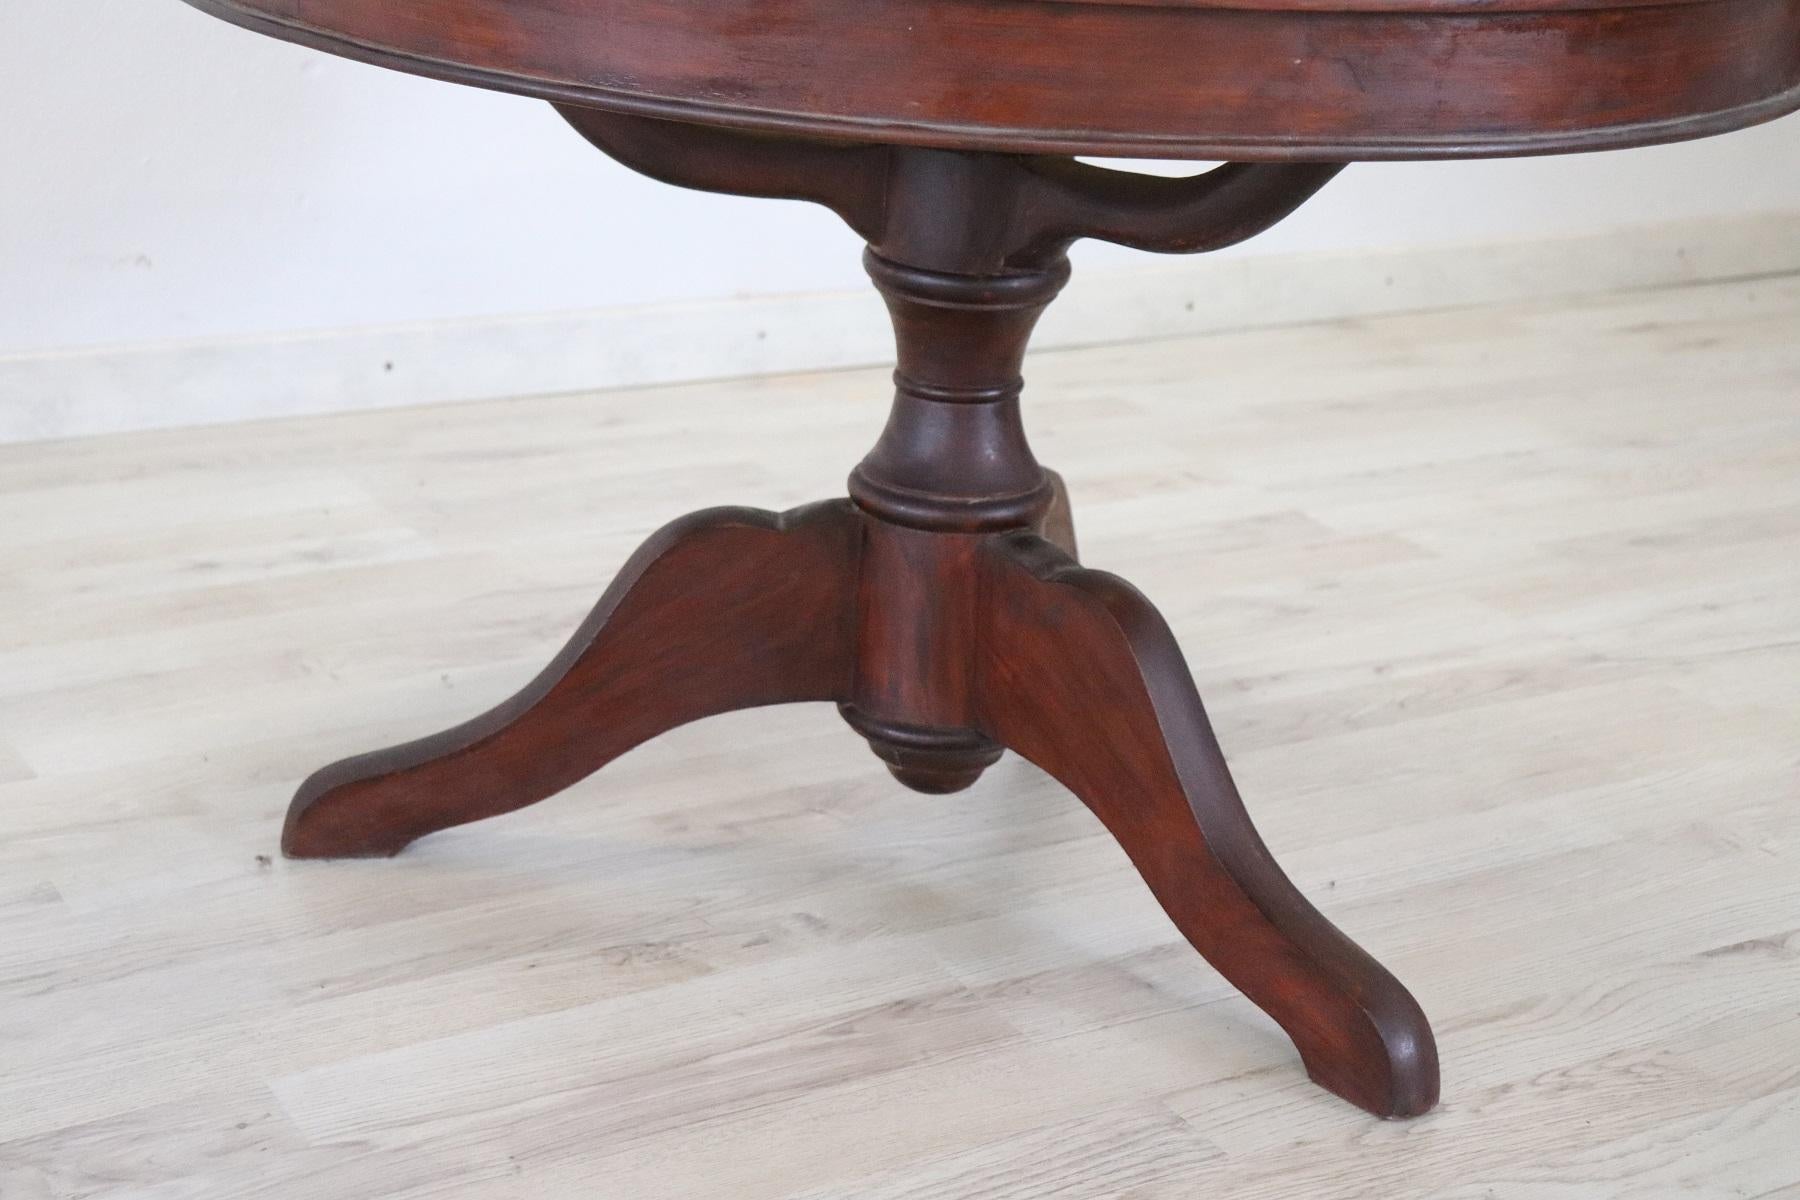 Late 19th Century 19th Century Italian Mahogany Round Coffee Table or Sofa Table with Glass Top